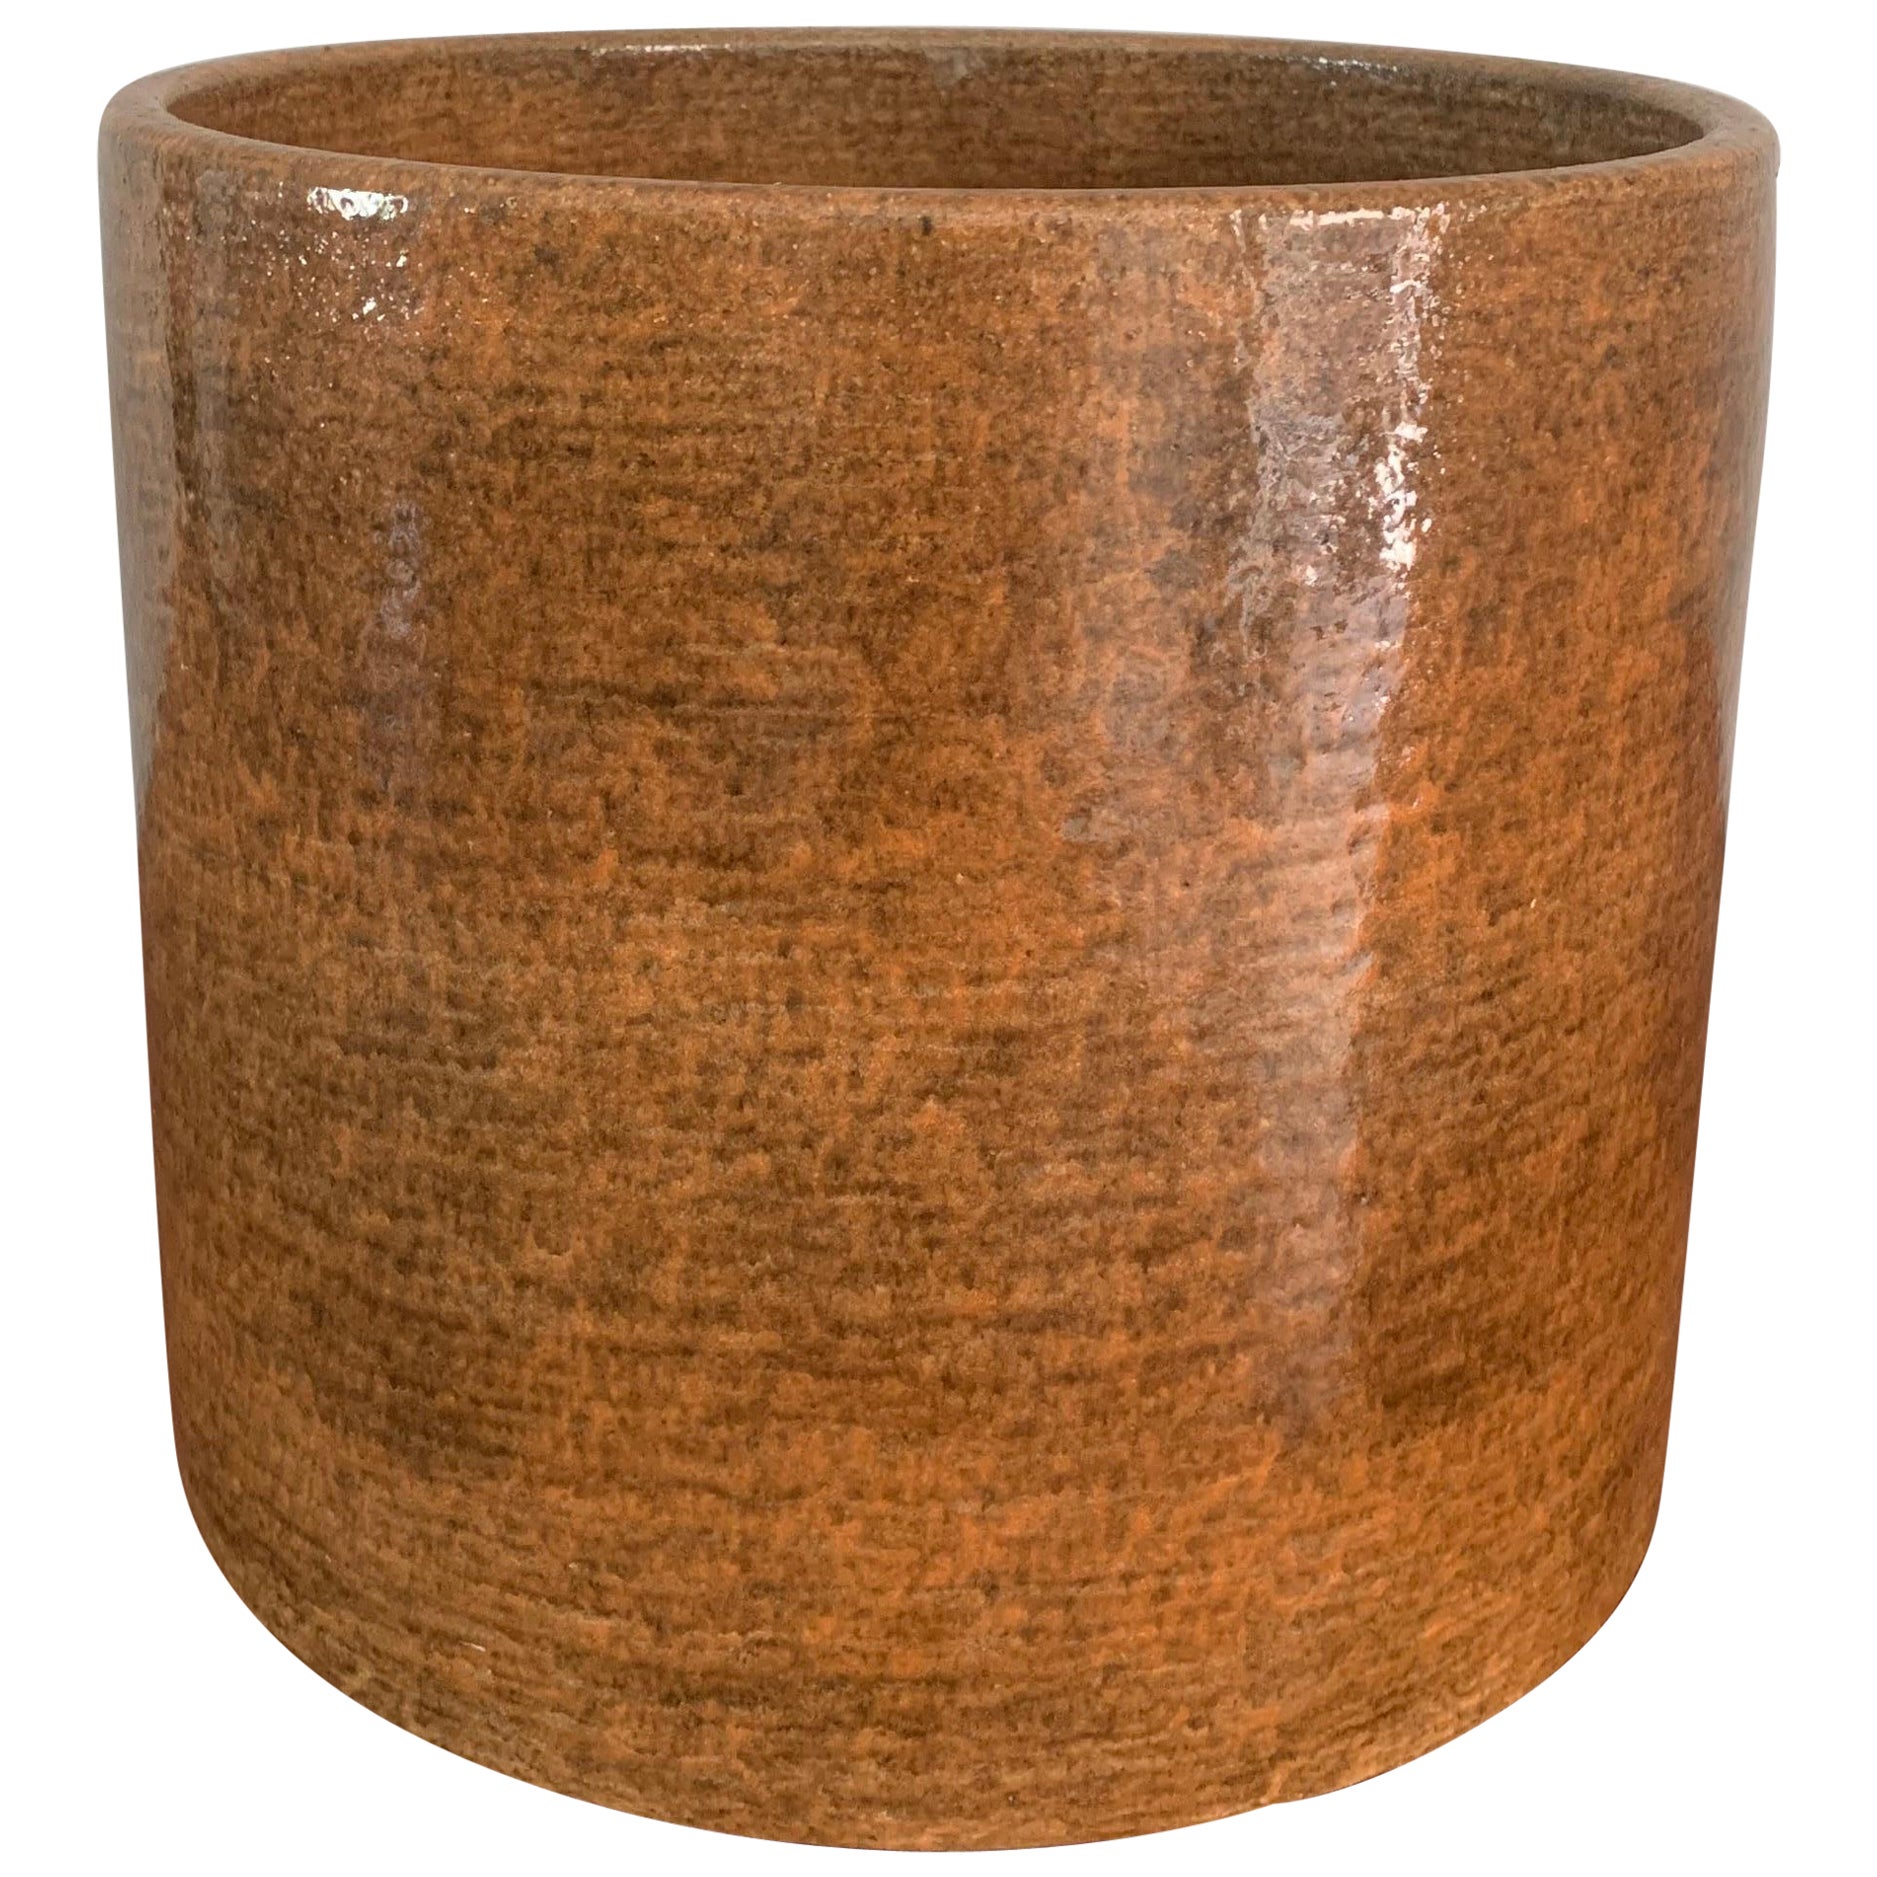 Brown Textured Gainey AC-12 Planter For Sale